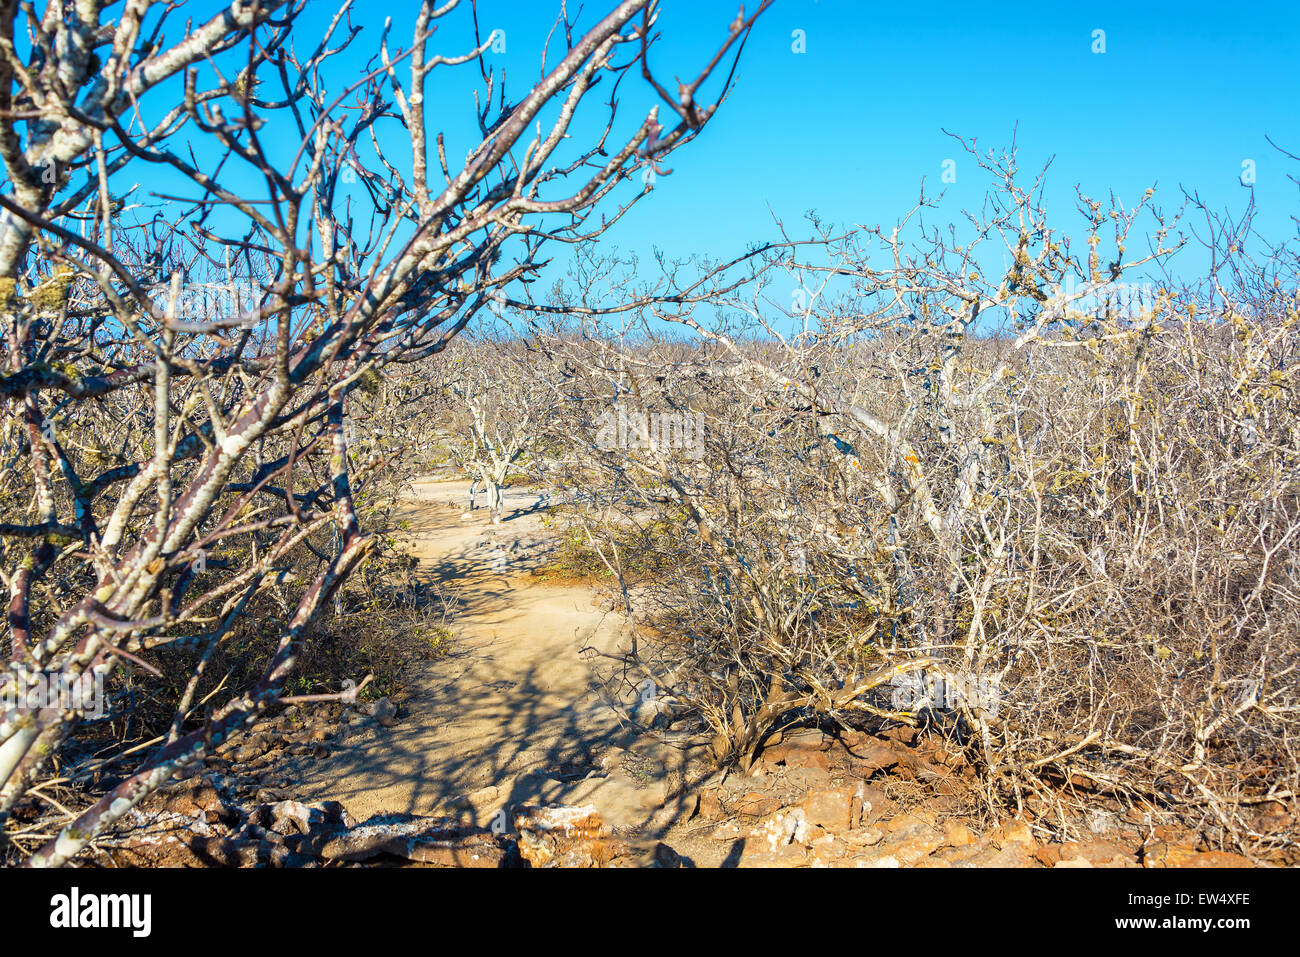 Landscape of dry twisted gnarled trees on Genovesa Island in the Galapagos Islands in Ecuador Stock Photo